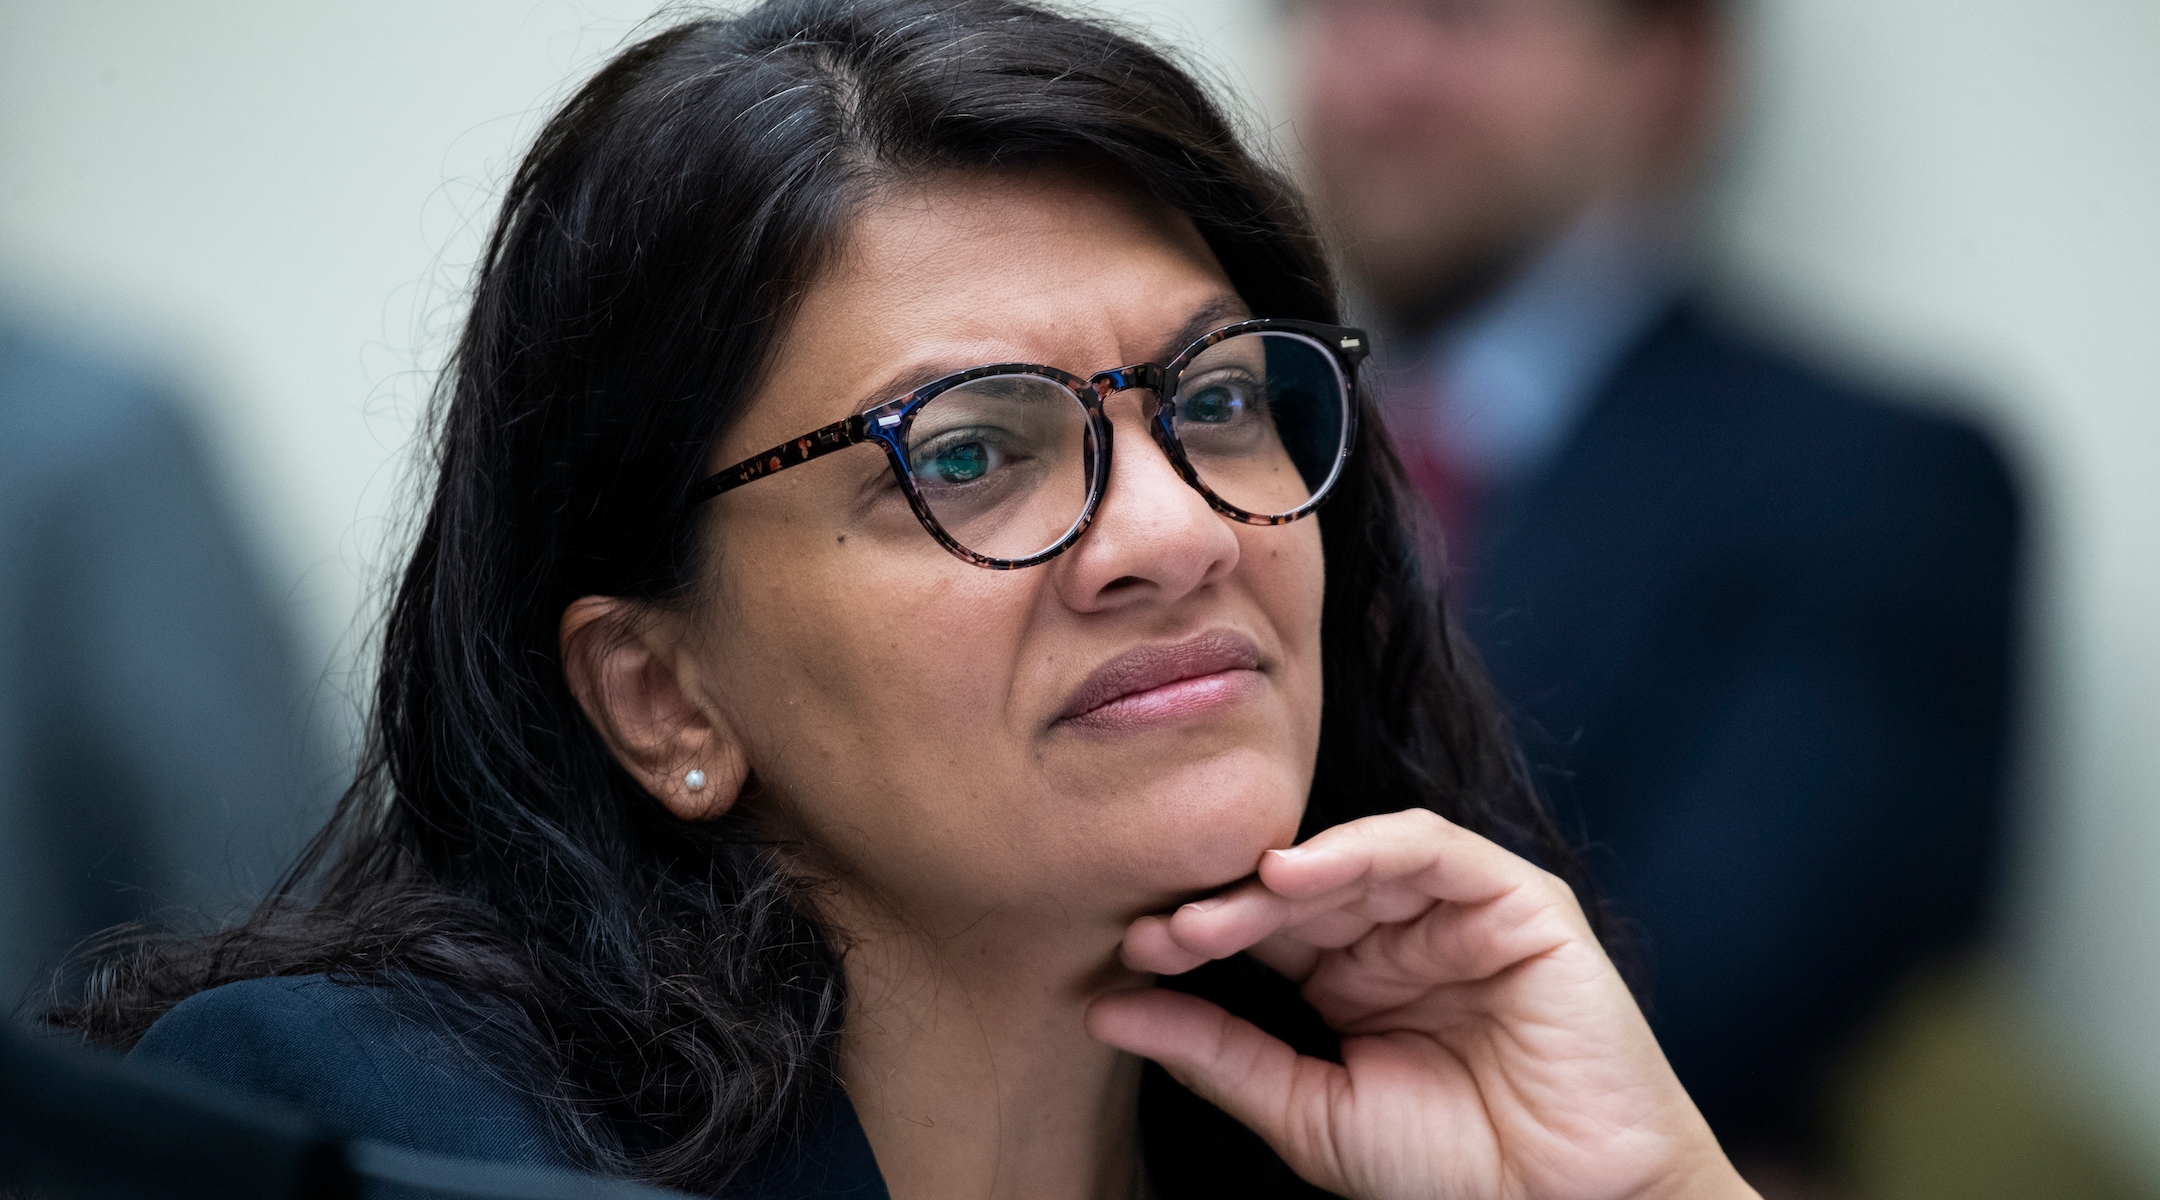 Rep. Rashida Tlaib, a Michigan Democrat, at a House Financial Services Committee hearing in the Capitol, July 20, 2021. (Tom Williams/CQ Roll Call/Getty Images)